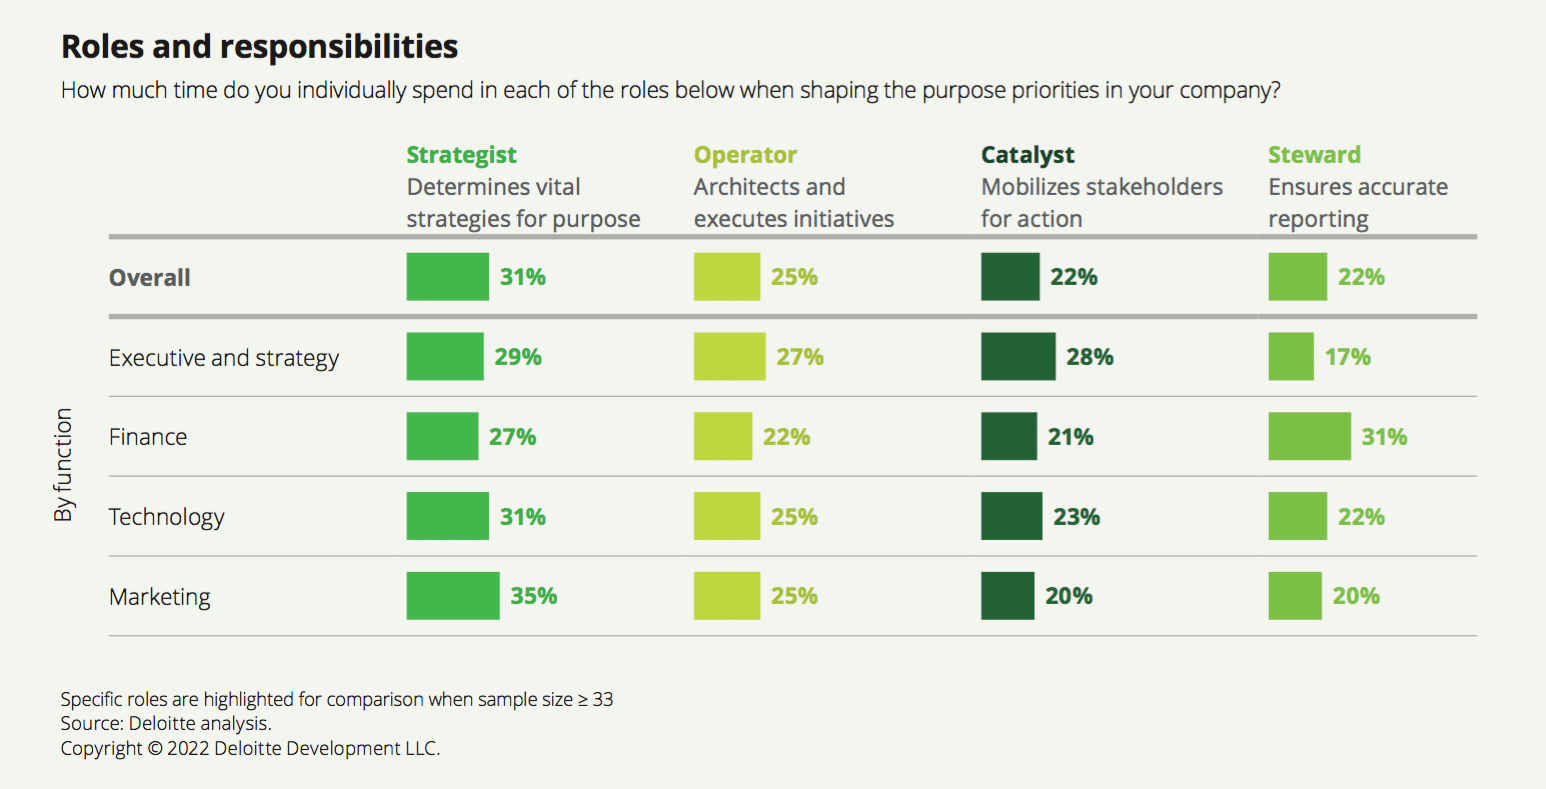 Corporate purpose tops C-suite priorities, but accountability, collaboration present challenges